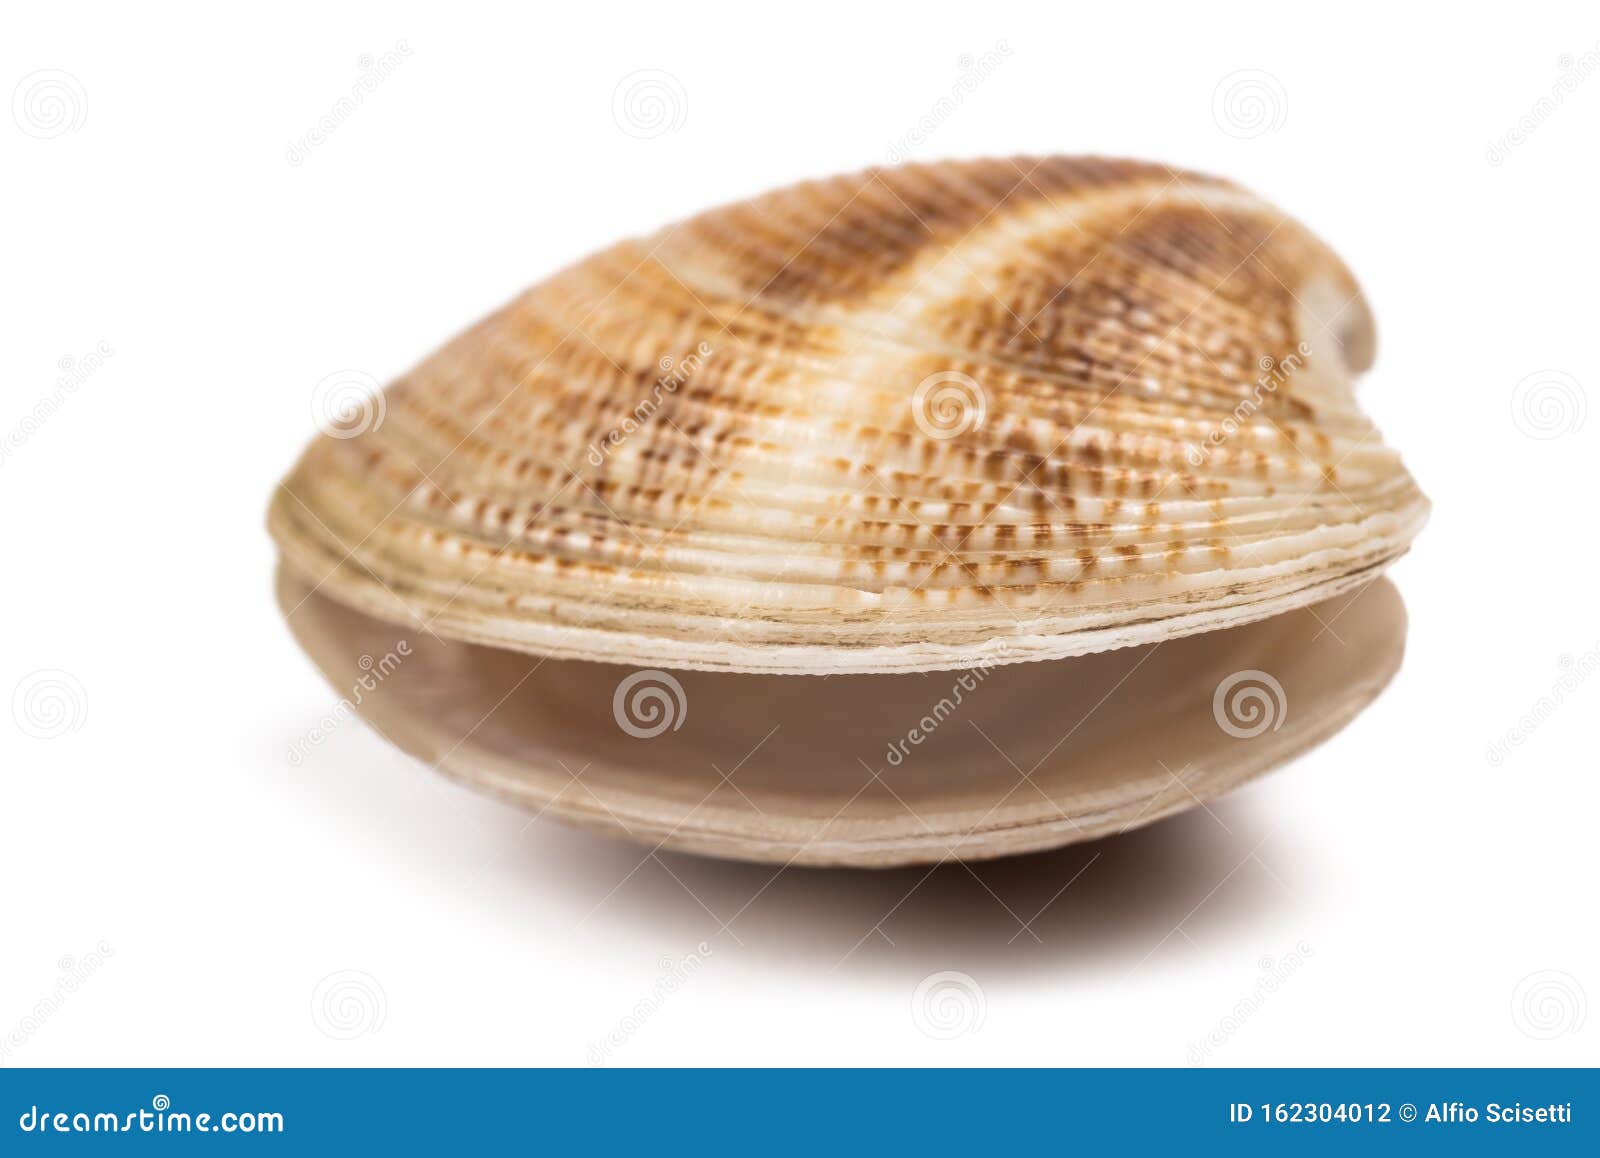 151,826 Clam Shell Royalty-Free Photos and Stock Images